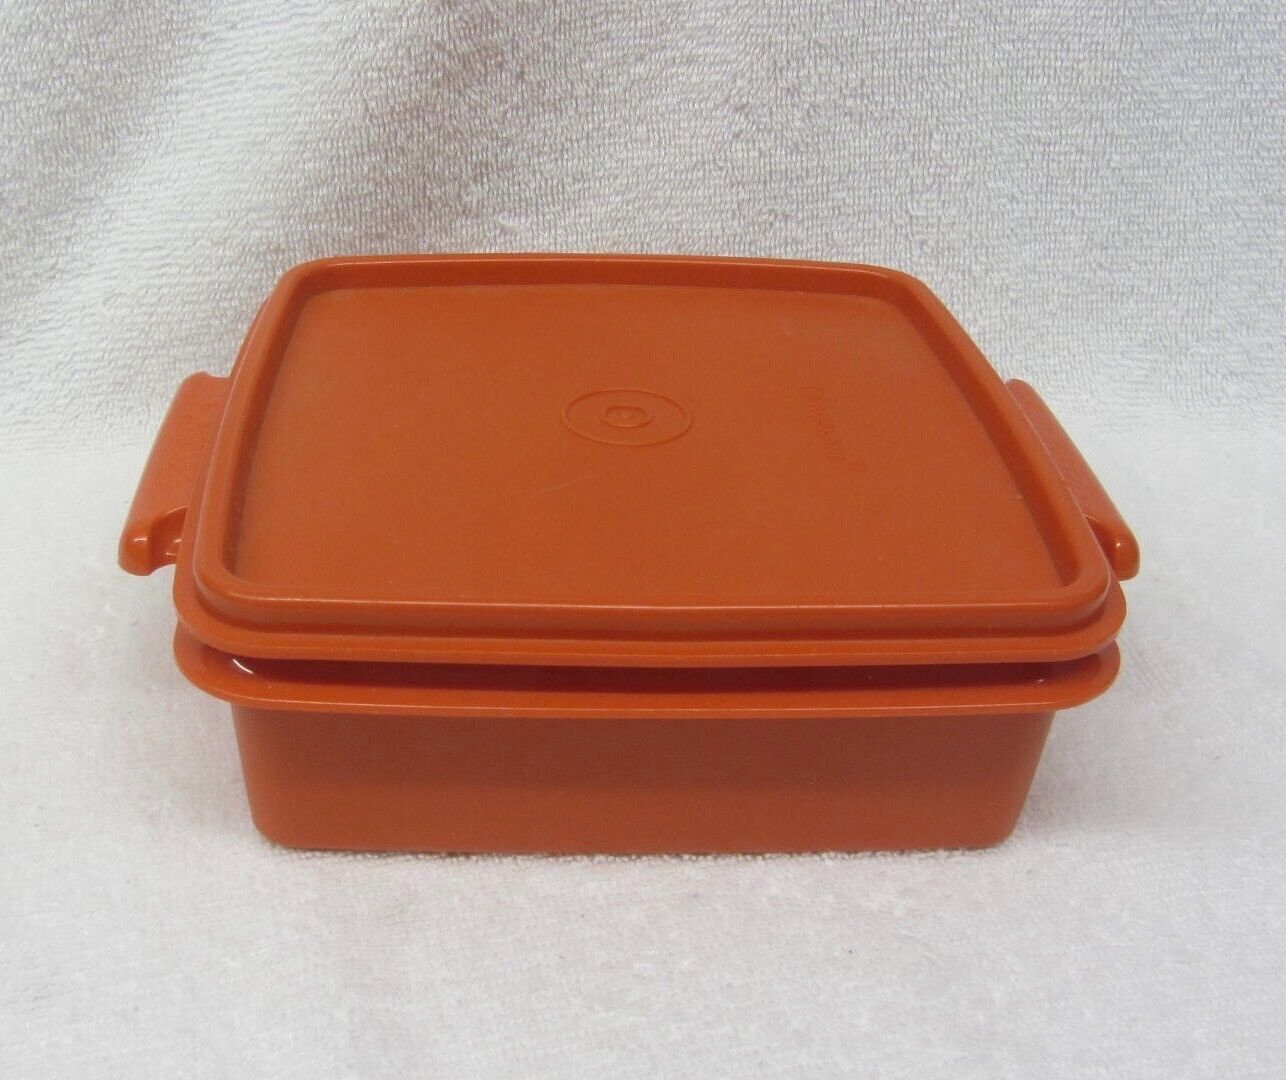 Tupperware 1362 Square Away Container Sandwich Keeper w/ Lid ORANGE